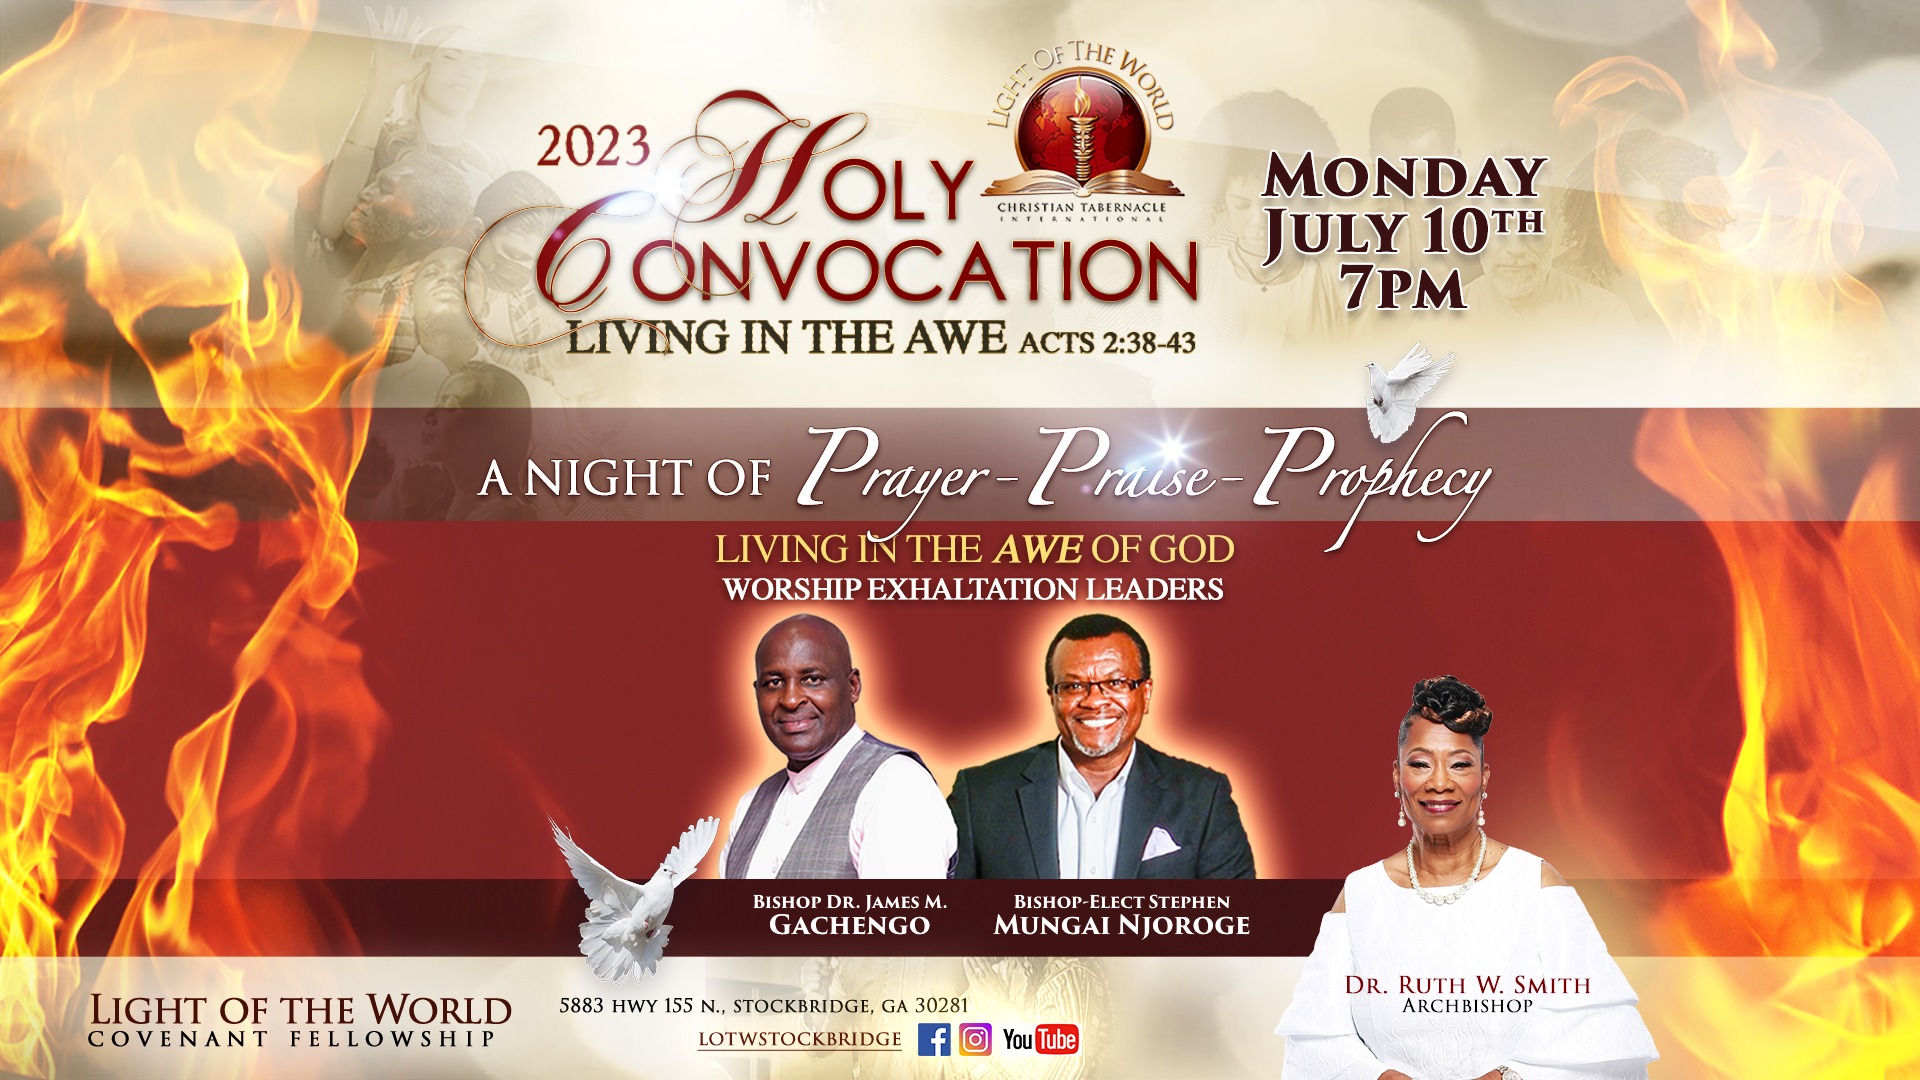 Holy Convocation night of praise prayer and prophecy flyer